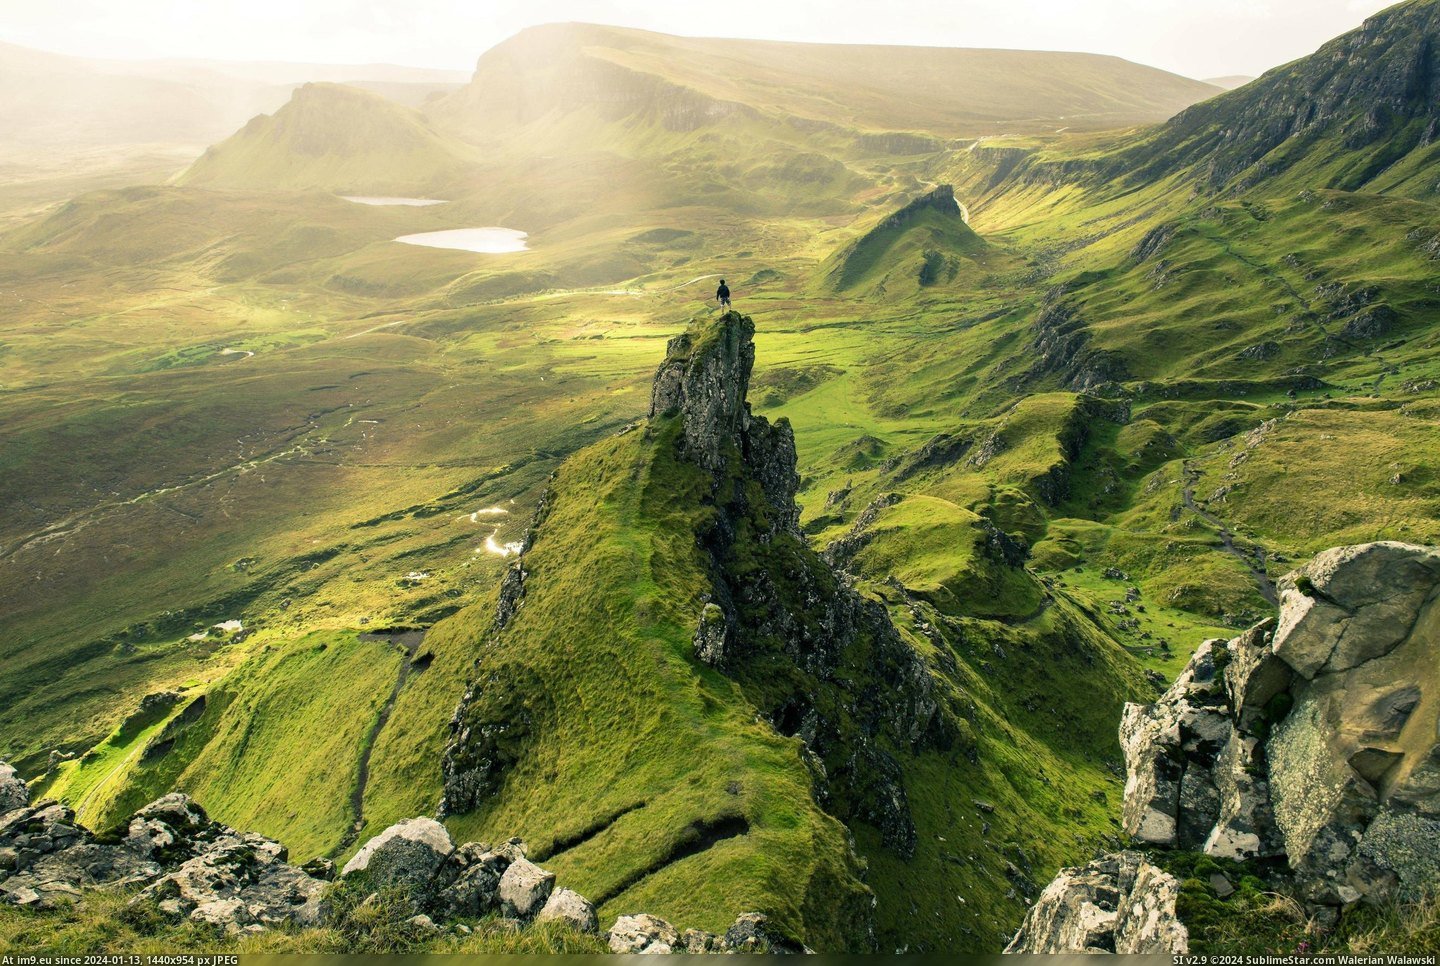 #Was #Area #Isle #Suggested #Quiraing #Skye #Scenery [Earthporn] I was suggested to post this here. This is the Quiraing area of the Isle of Skye, with me taking in the scenery. [26 Pic. (Obraz z album My r/EARTHPORN favs))